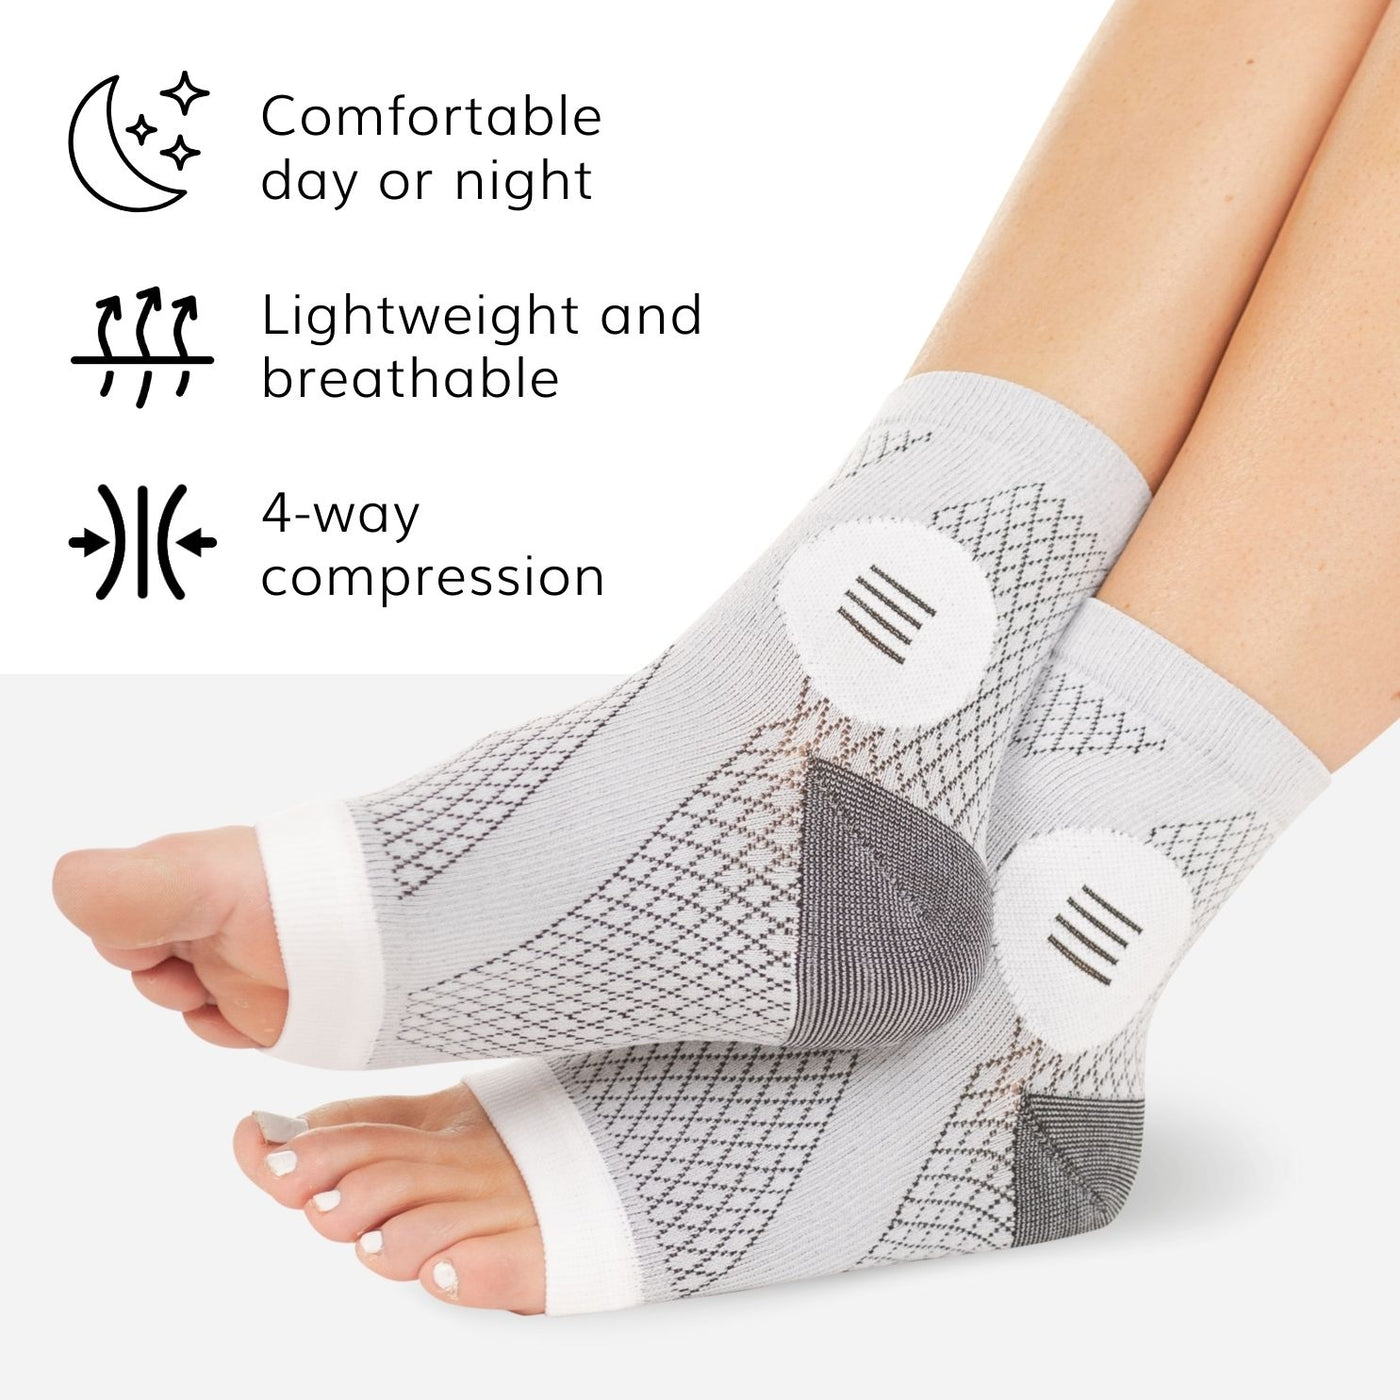 The foot neuropathy pain relief socks are comfortable and lightweight for day or night support